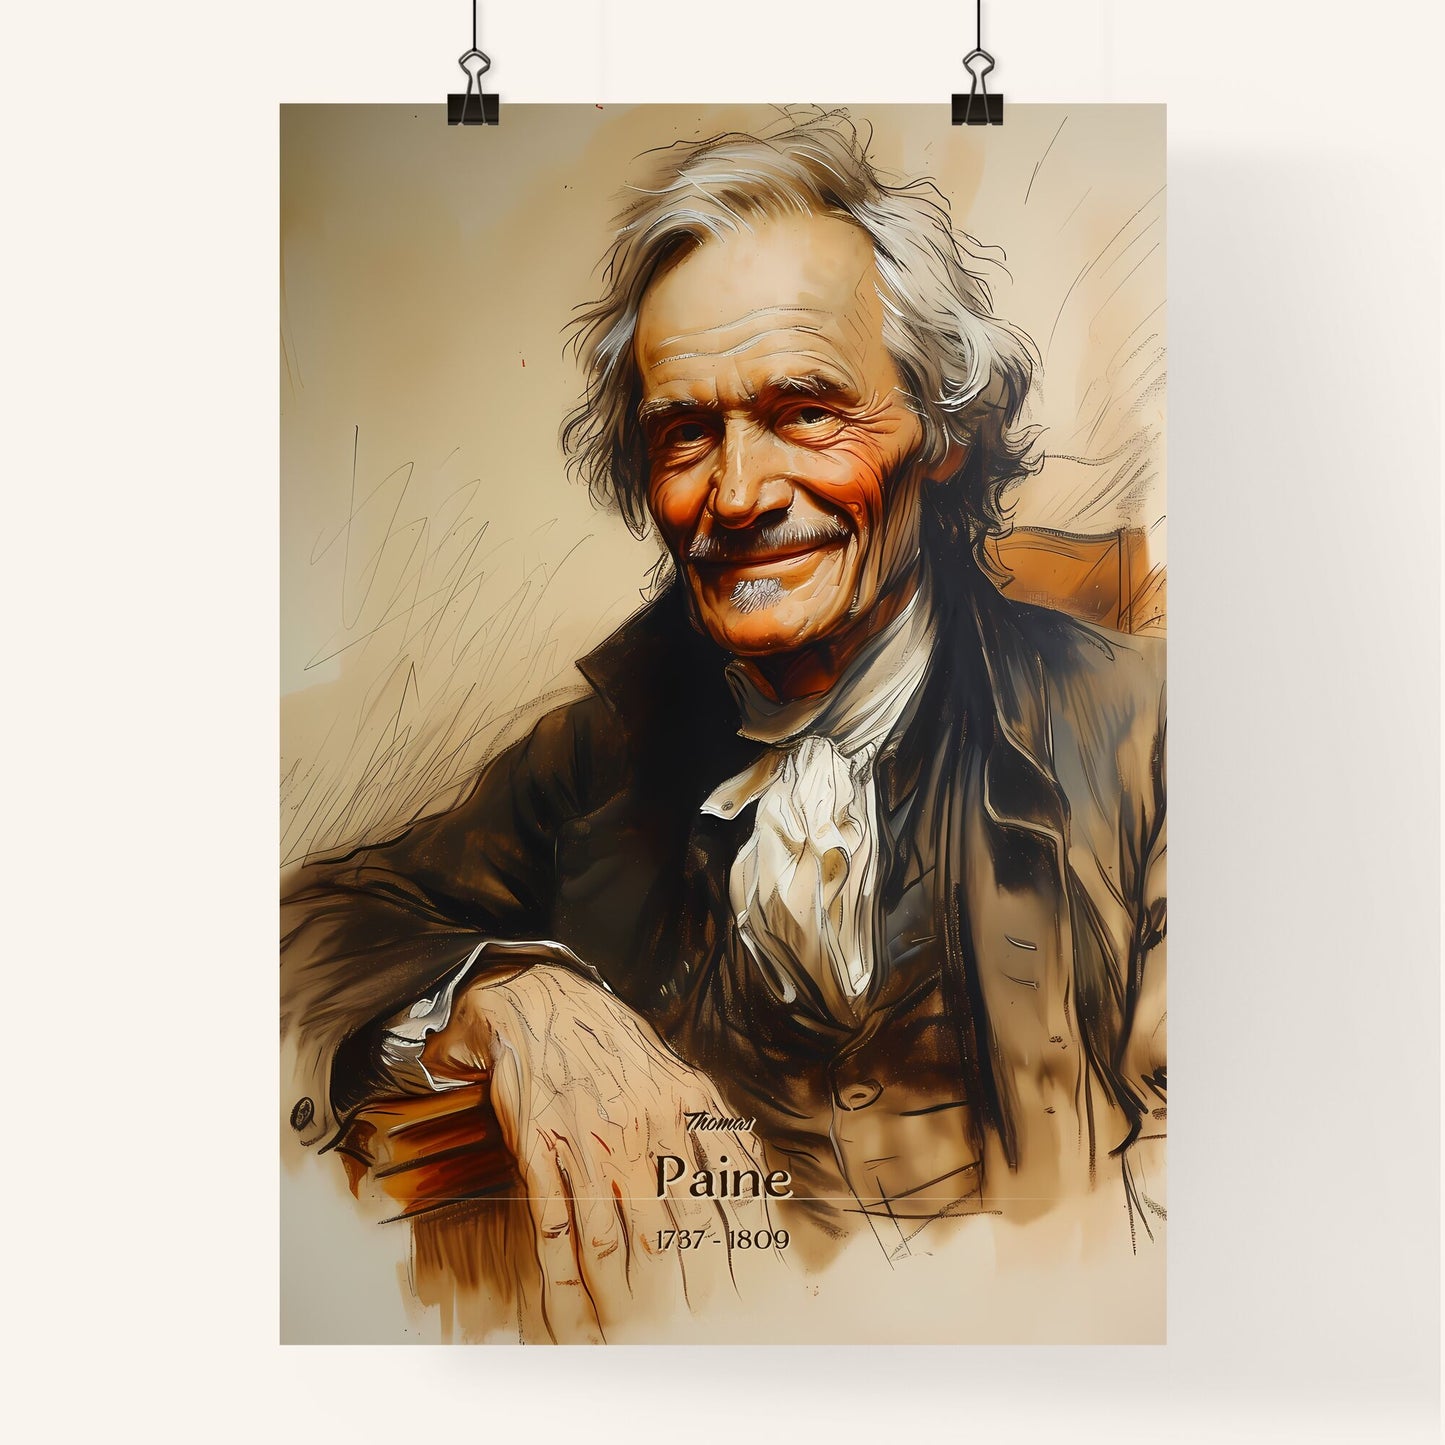 Thomas, Paine, 1737 - 1809, A Poster of a painting of a man Default Title